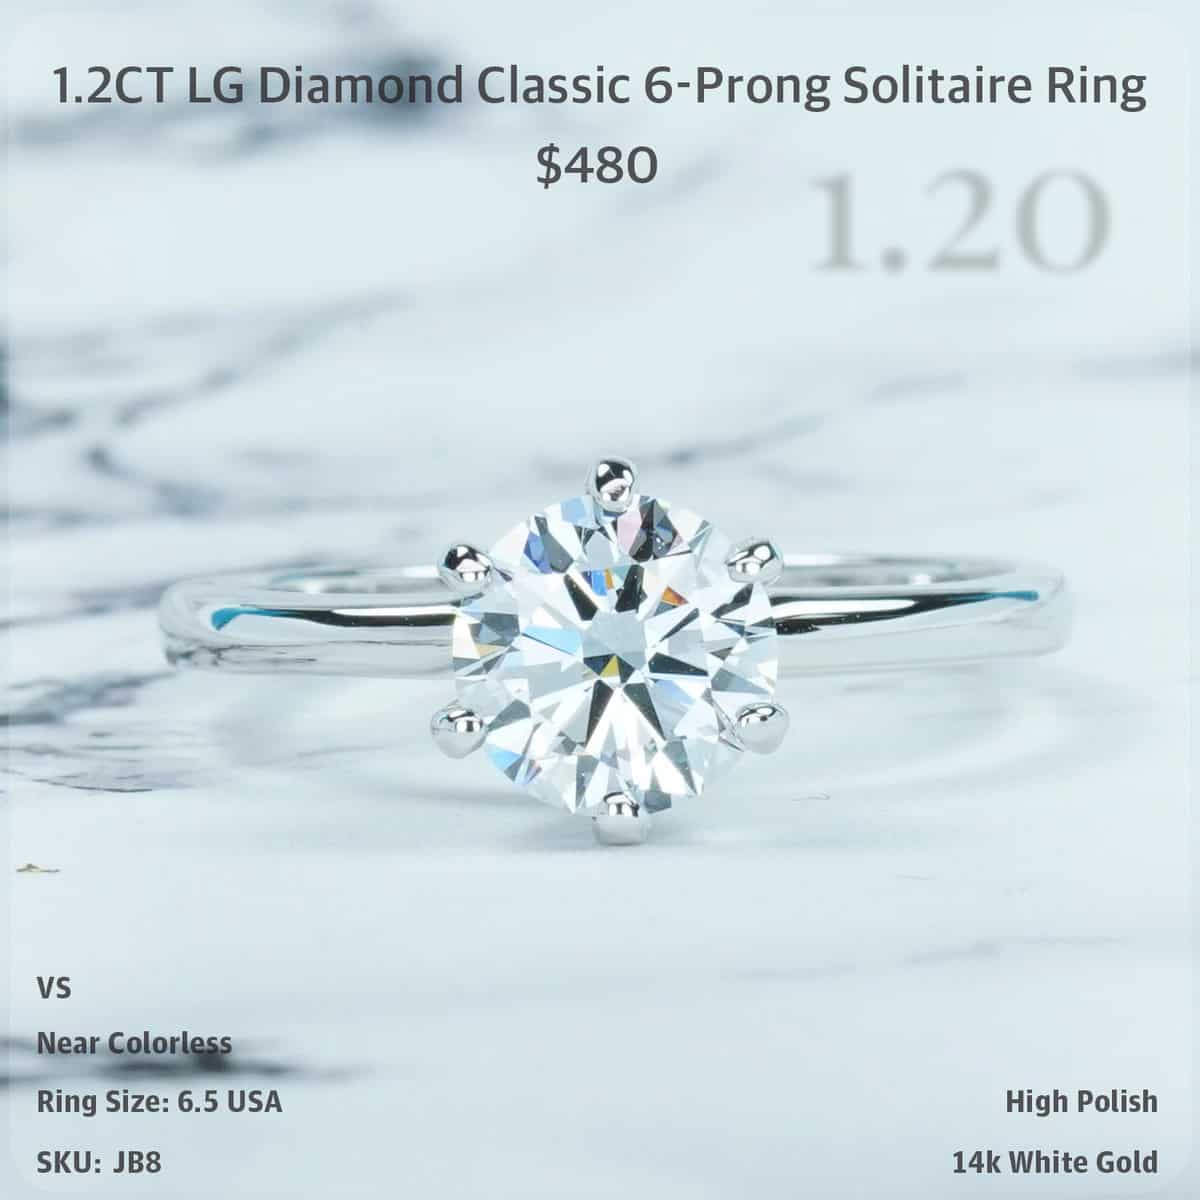 1.2CT LG Diamond Classic 6-Prong Solitaire Ring